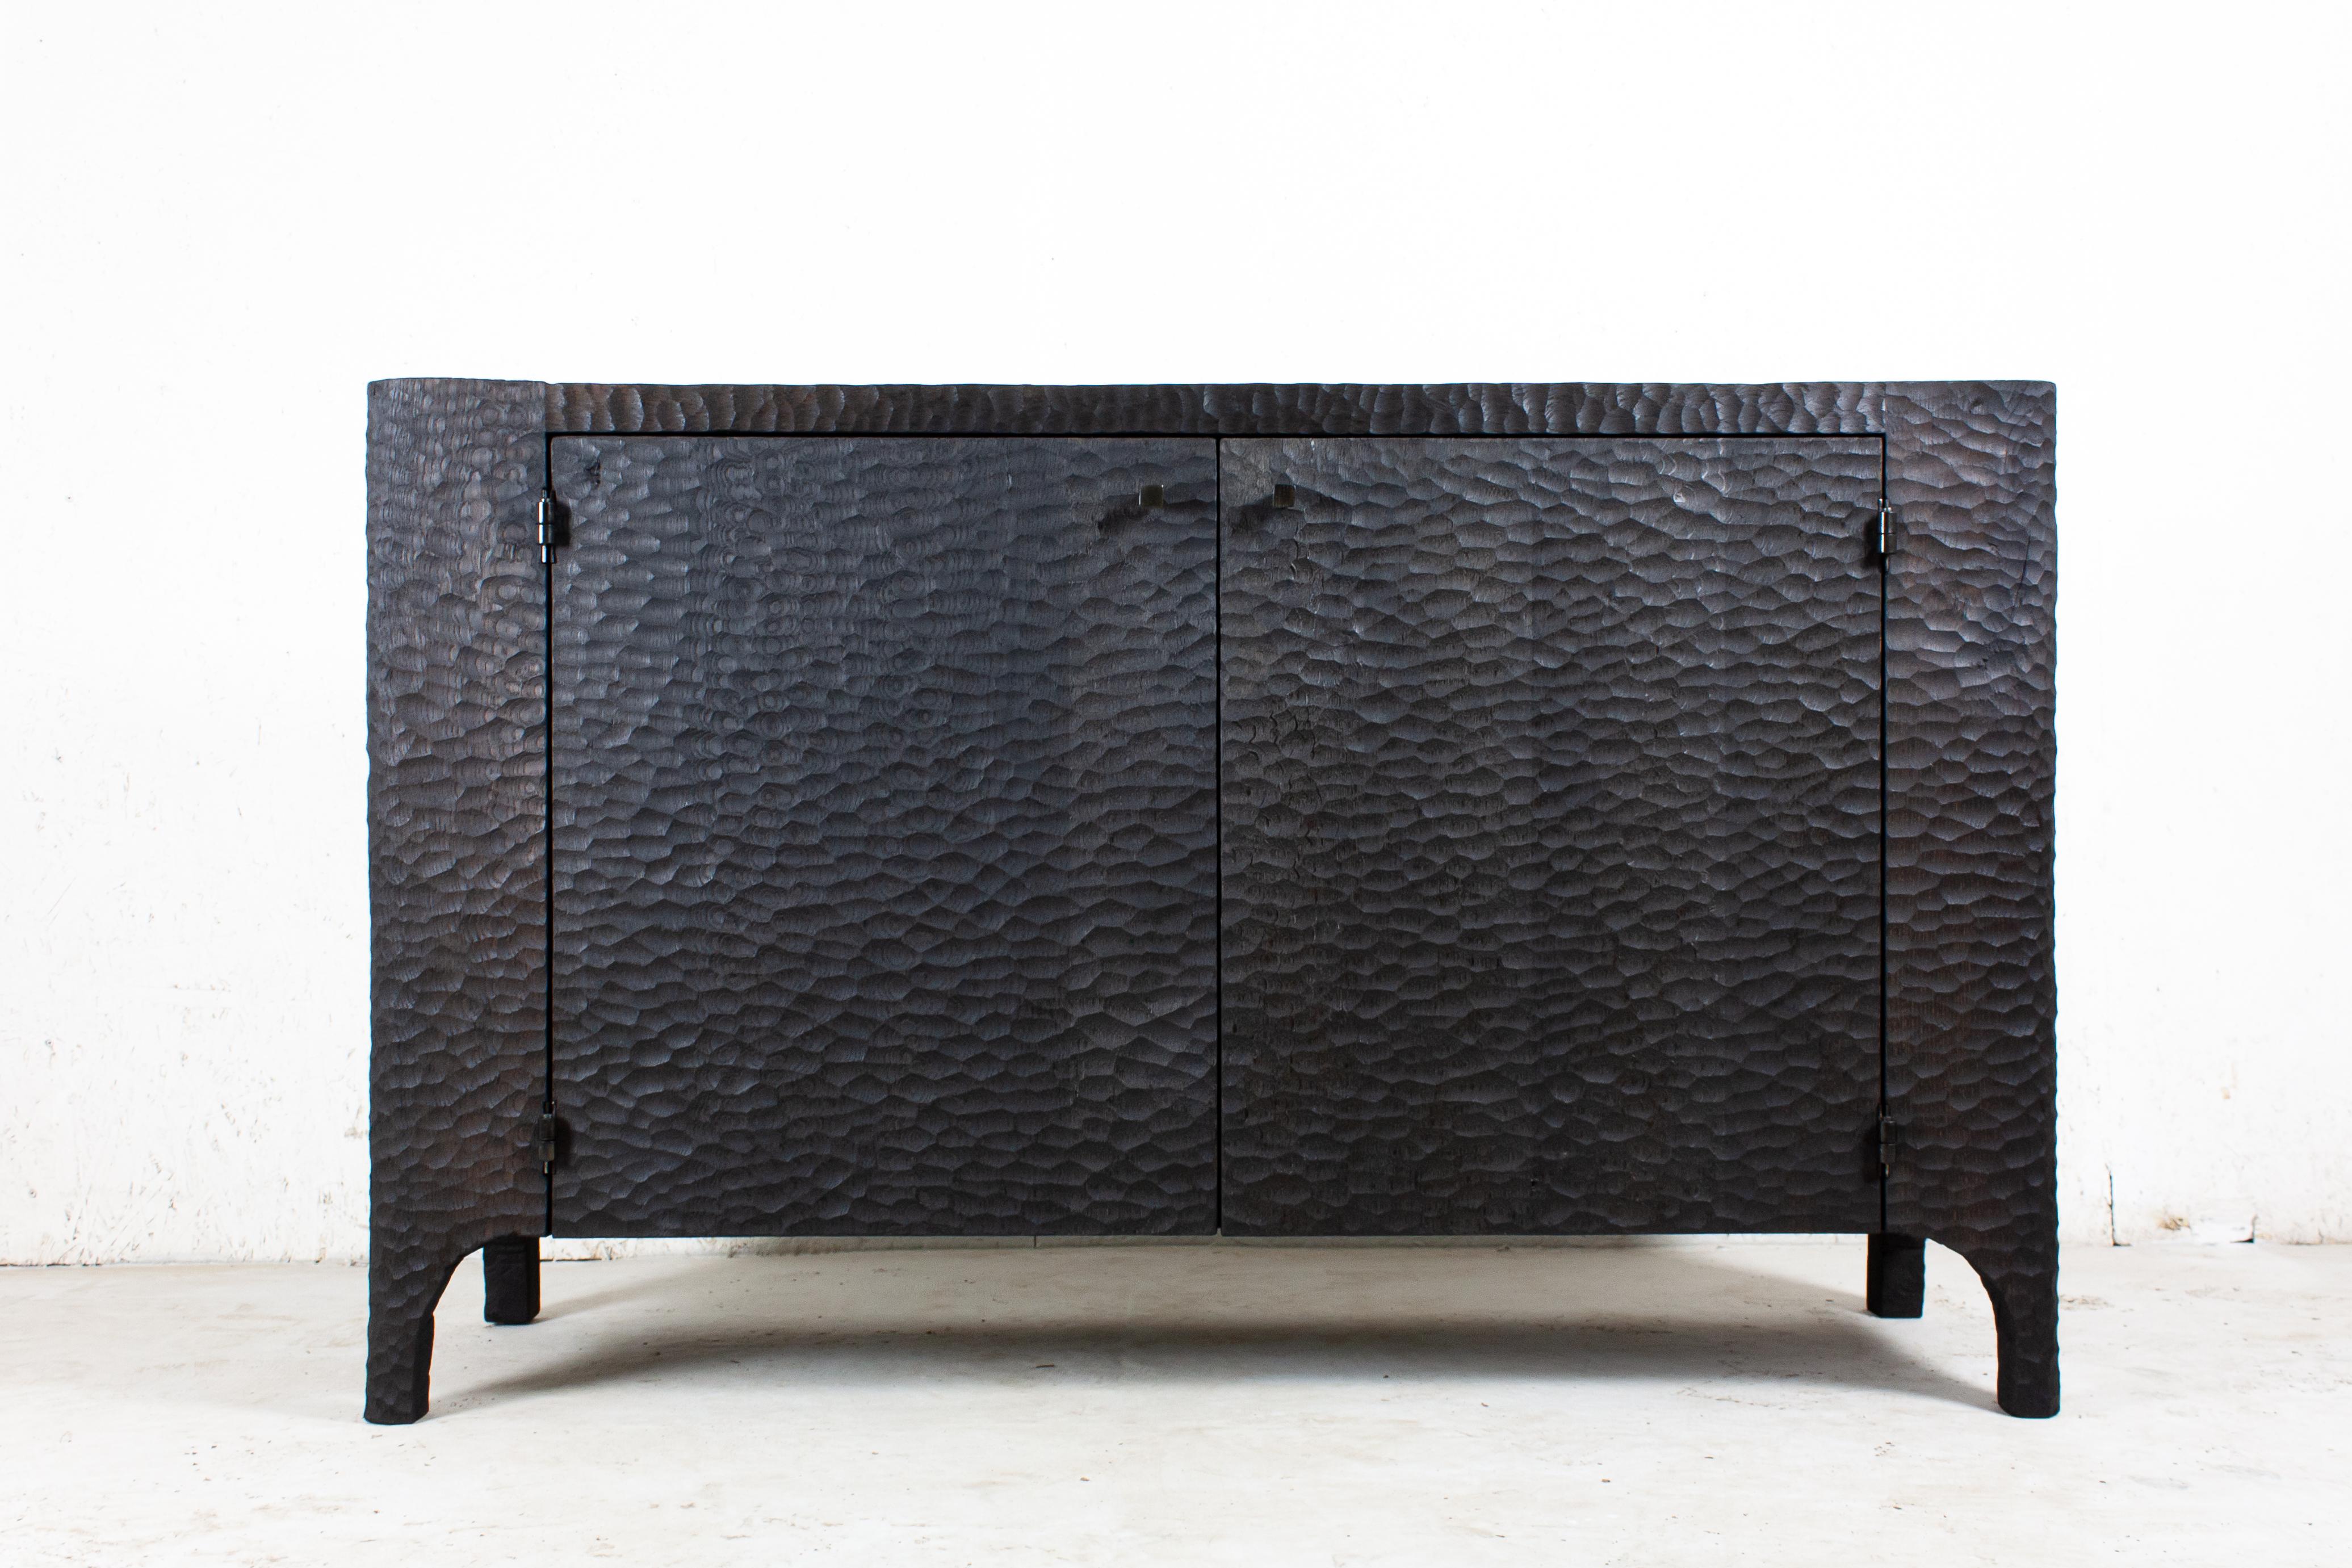 Dresser / Cabinet
Sculpted wood (solid oak)
Finish: hammered, dark

SÓHA design studio conceives and produces furniture design and decorative objects in solid oak in an authentic style. Inspiration to create all these items comes from the Russian